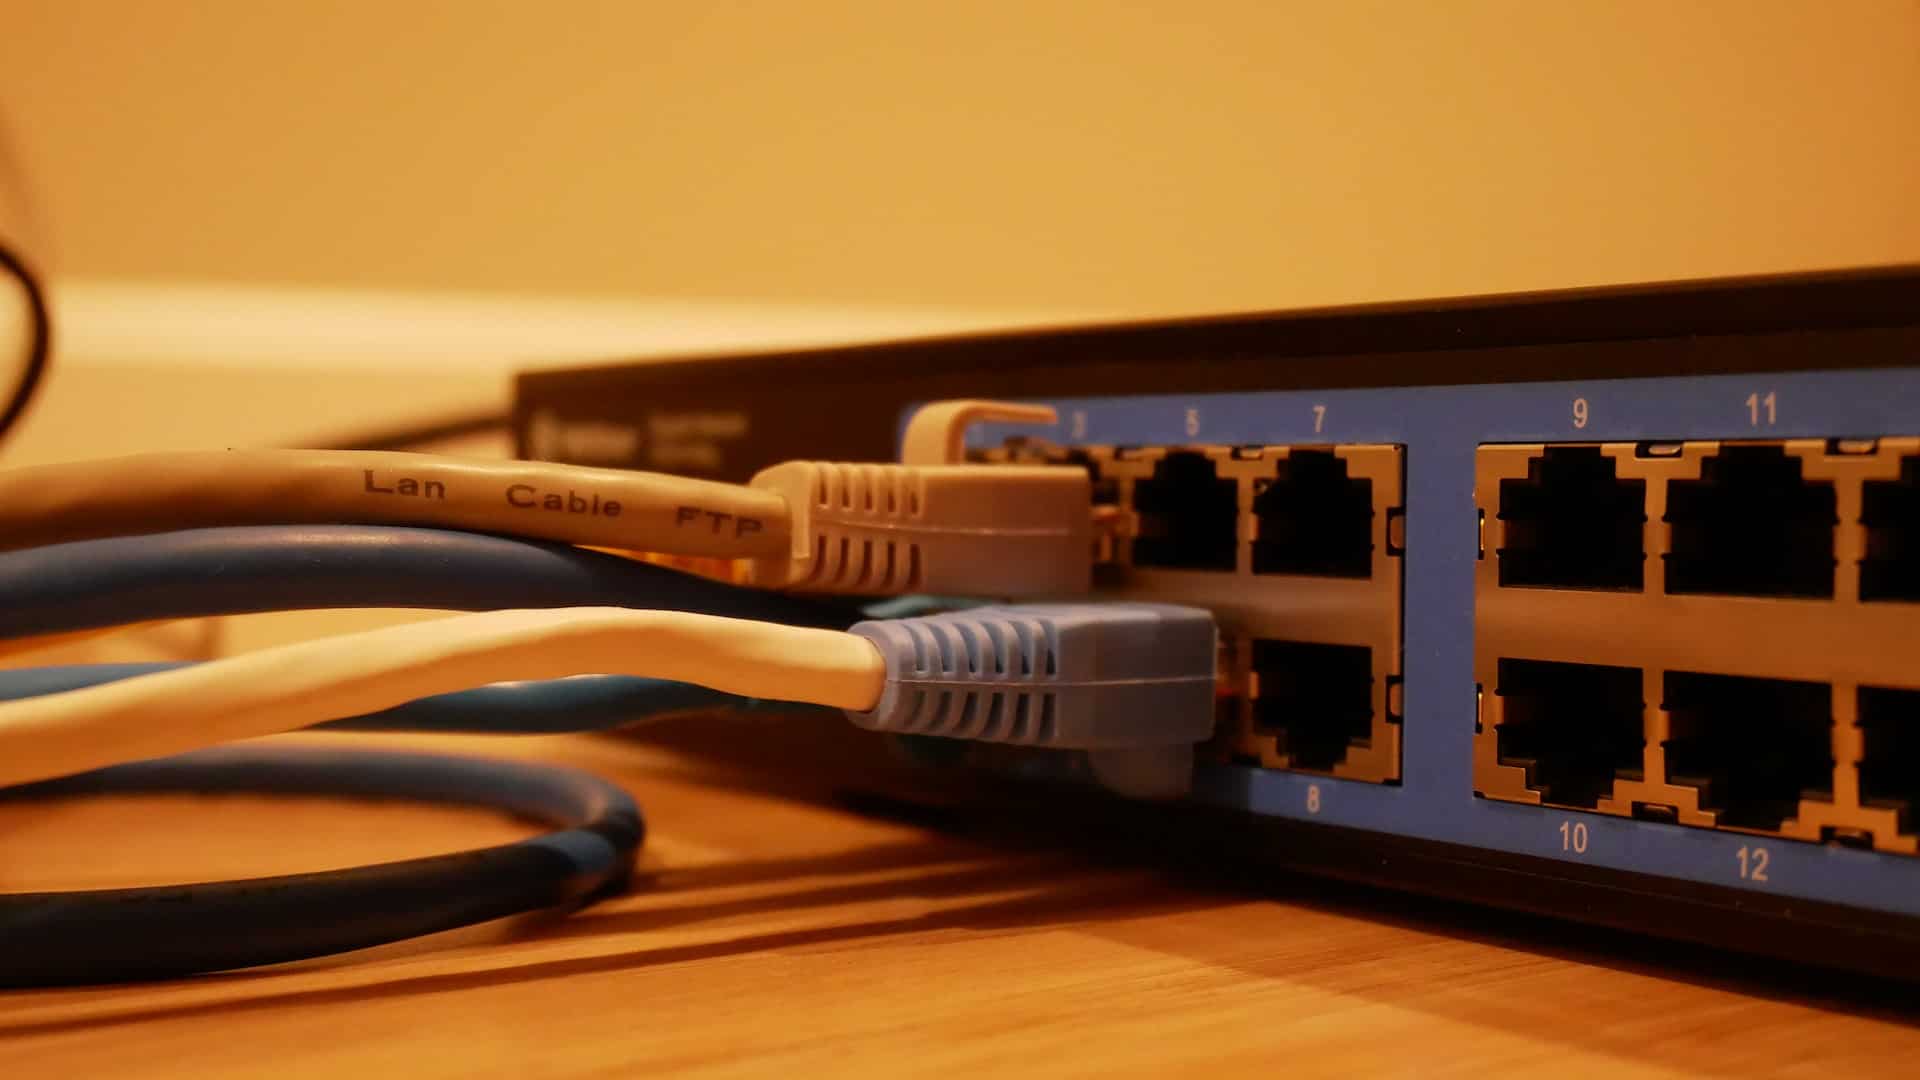 Cables connecting to ports